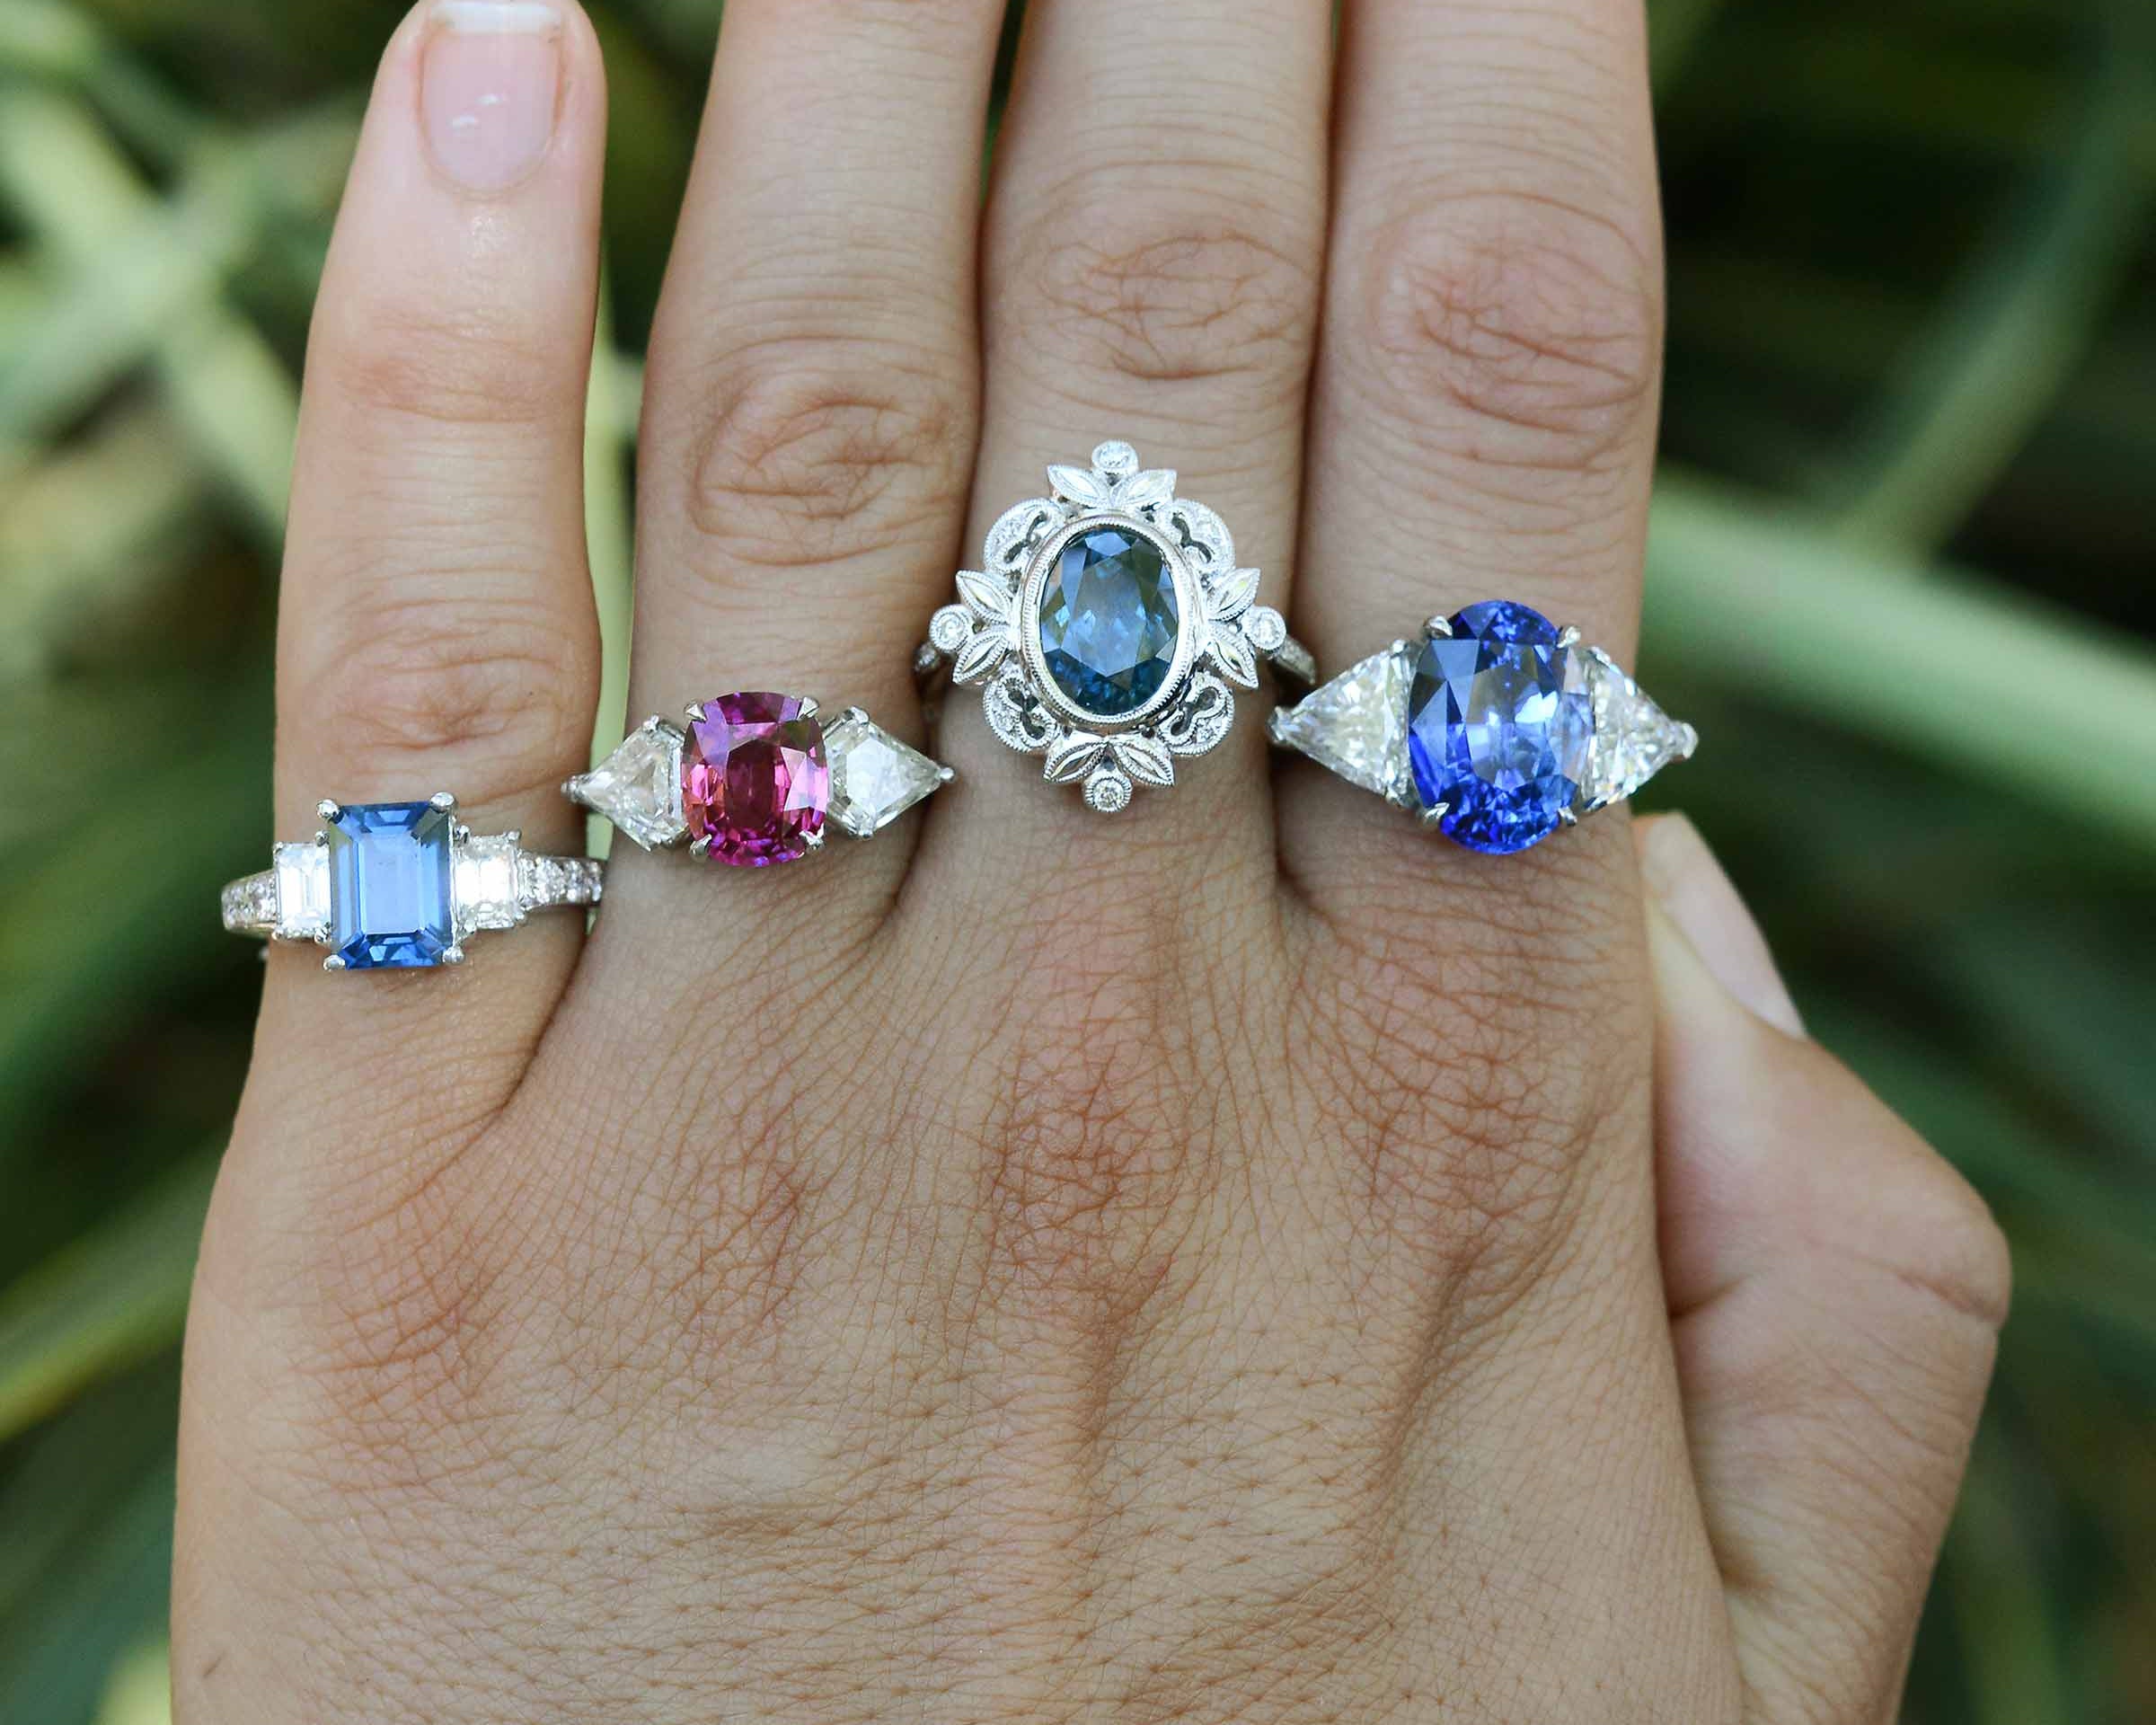 Some of our white gold, sapphire & diamond three stone engagement rings.